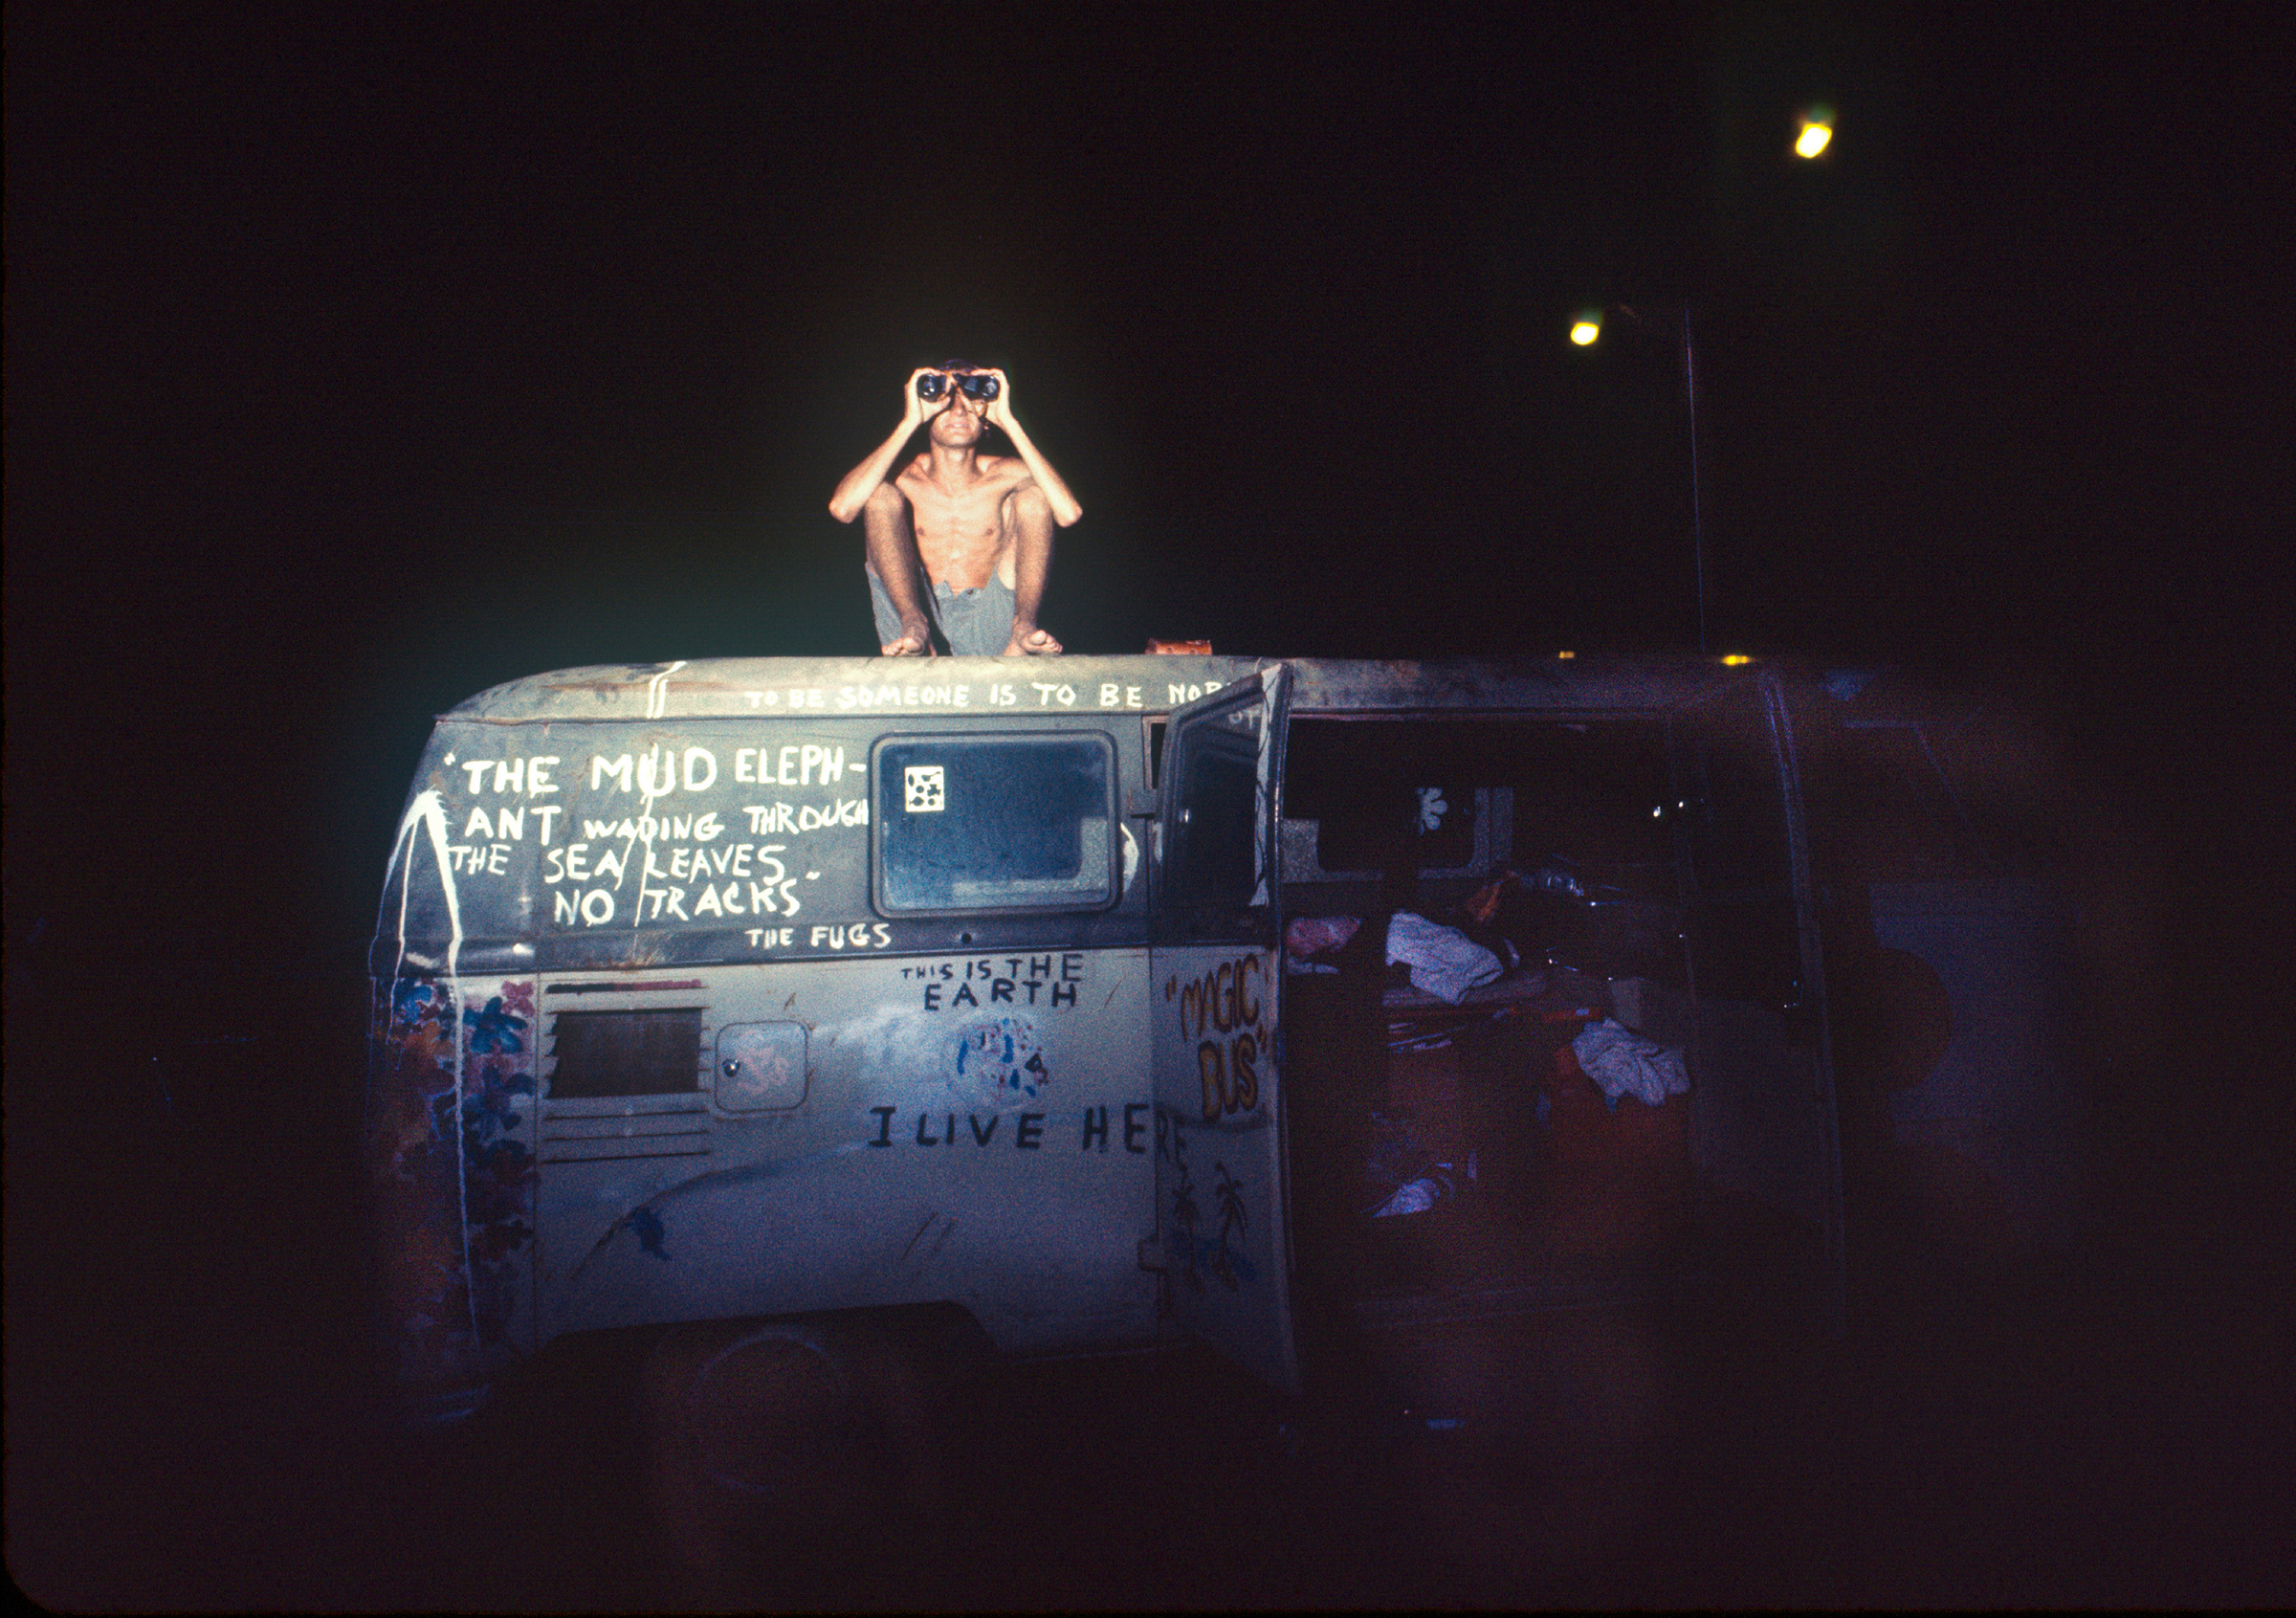 A camper tries to get a better view of the Apollo 11 launch site. (David Burnett —Contact Press Images for TIME)